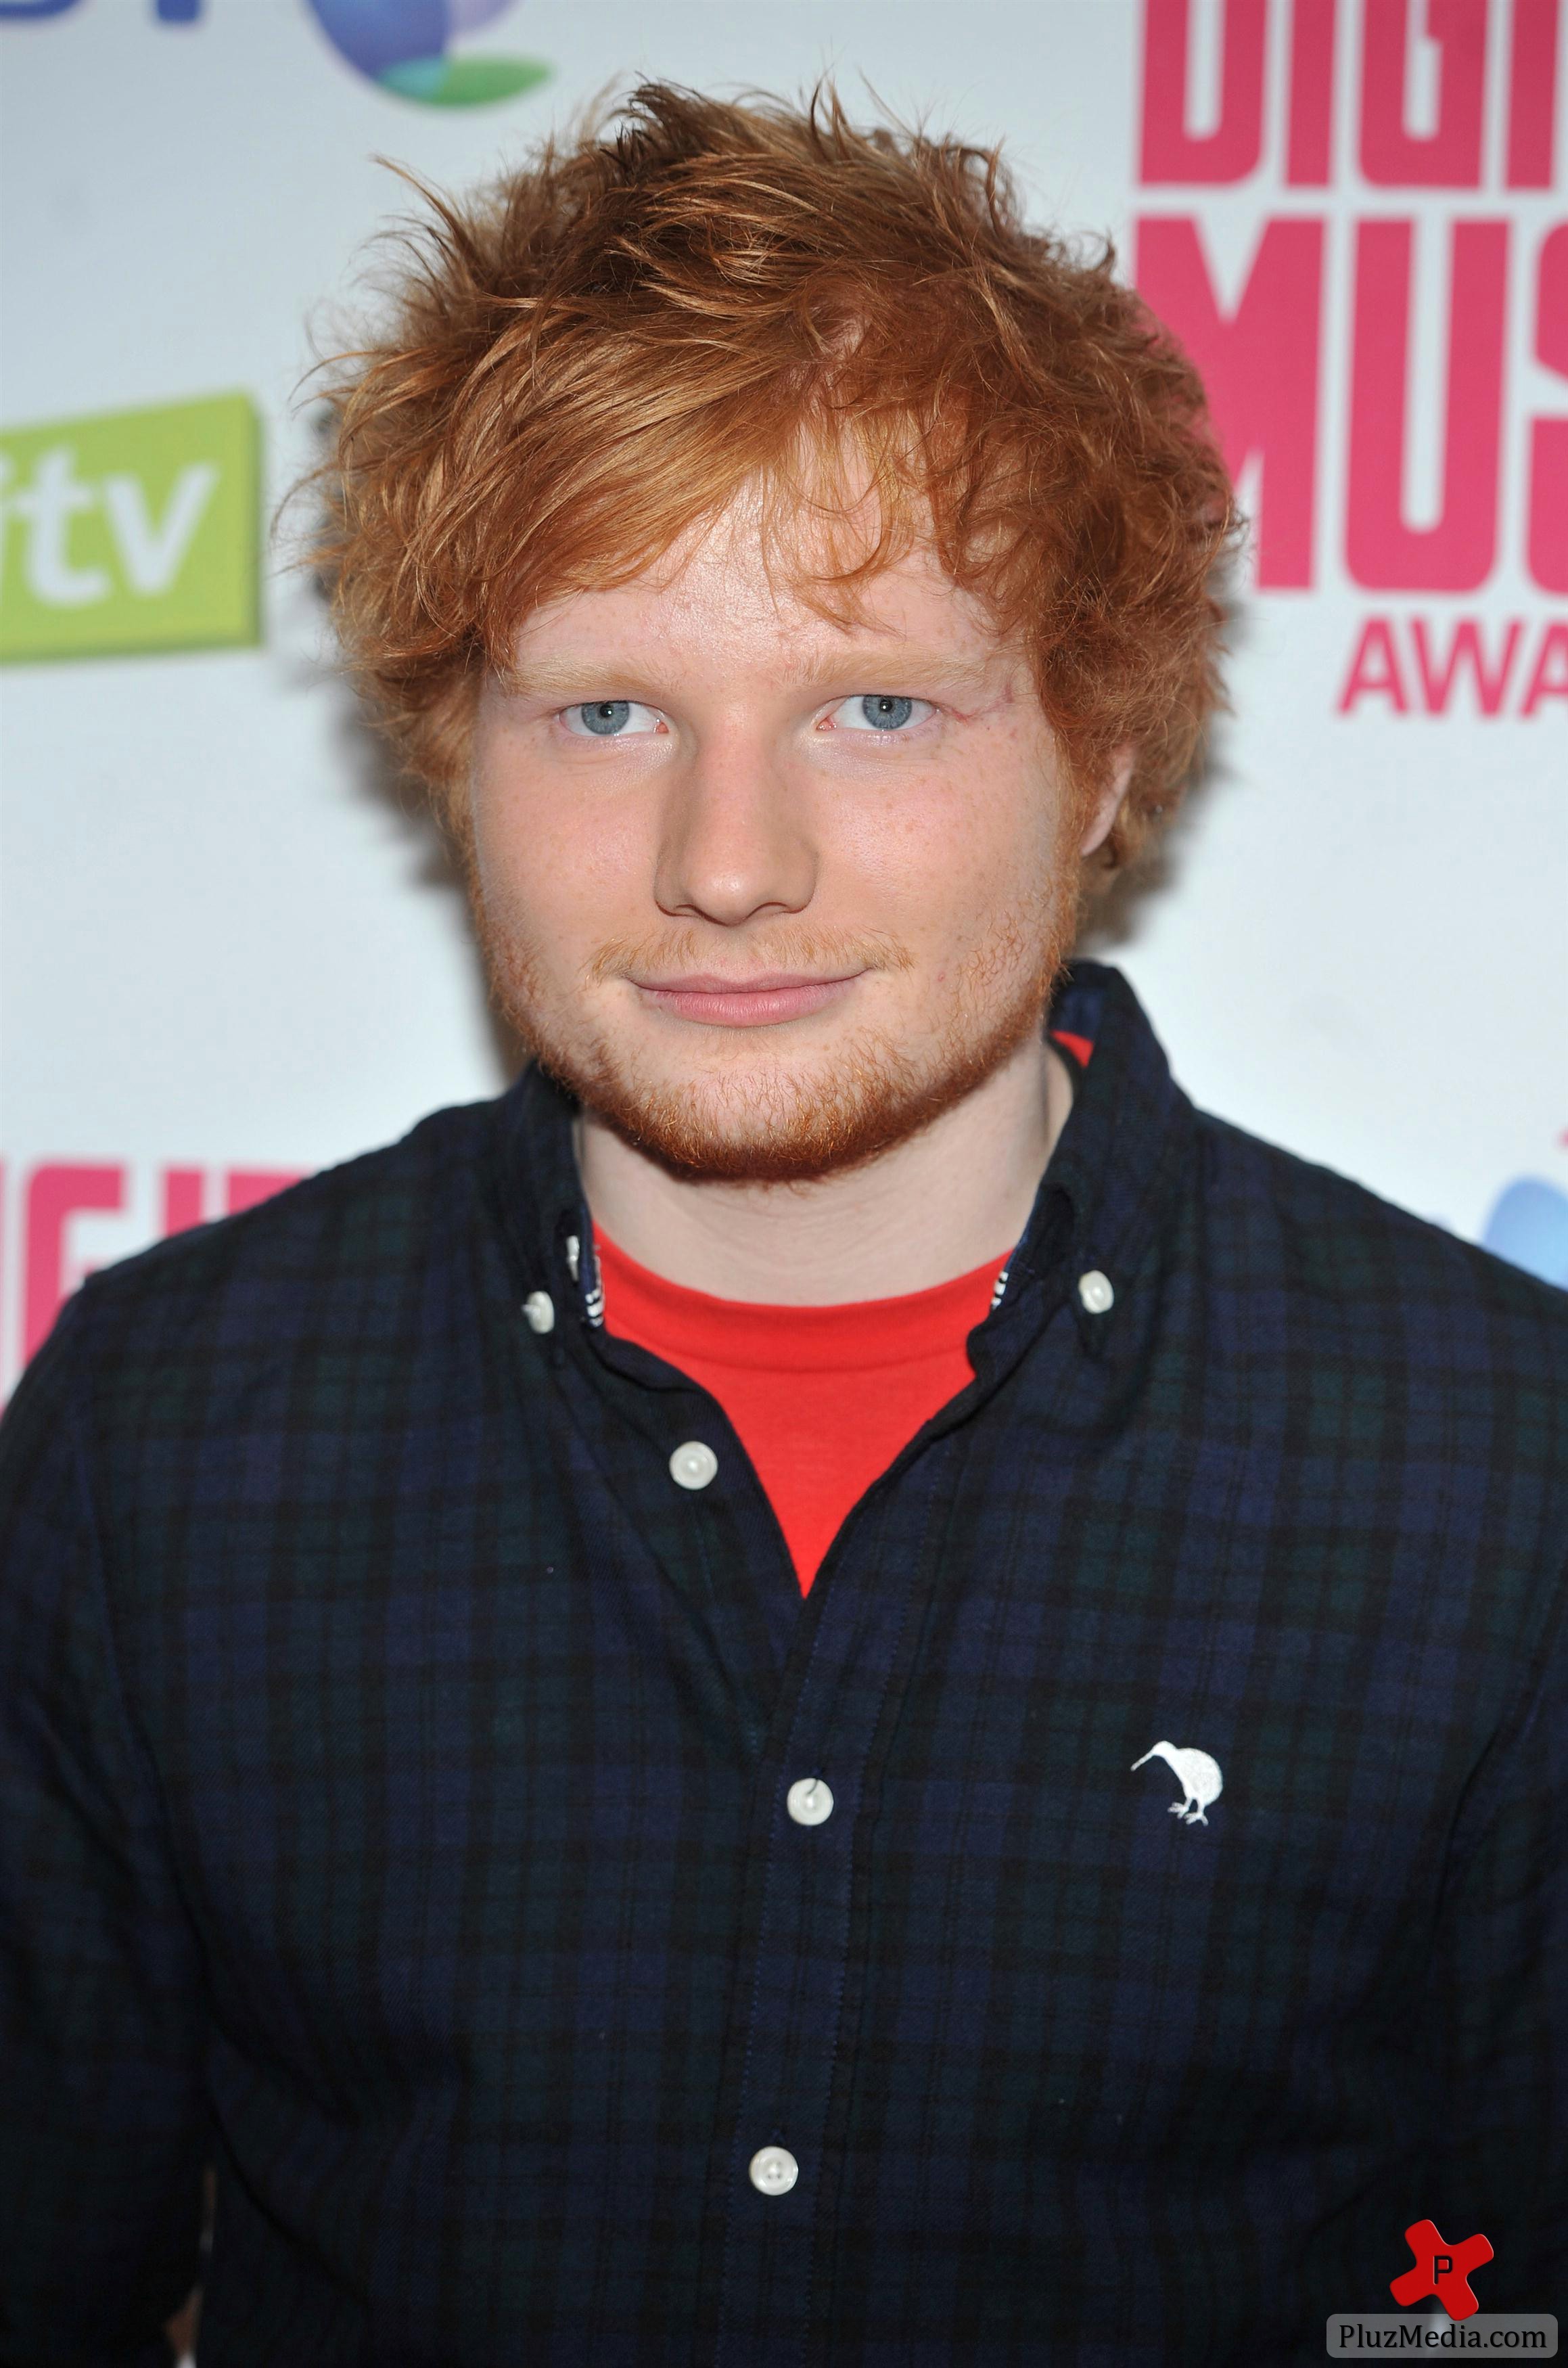 Ed Sheeran - BT Digital Music Awards 2011 held at the Roundhouse - Arrivals | Picture 89507